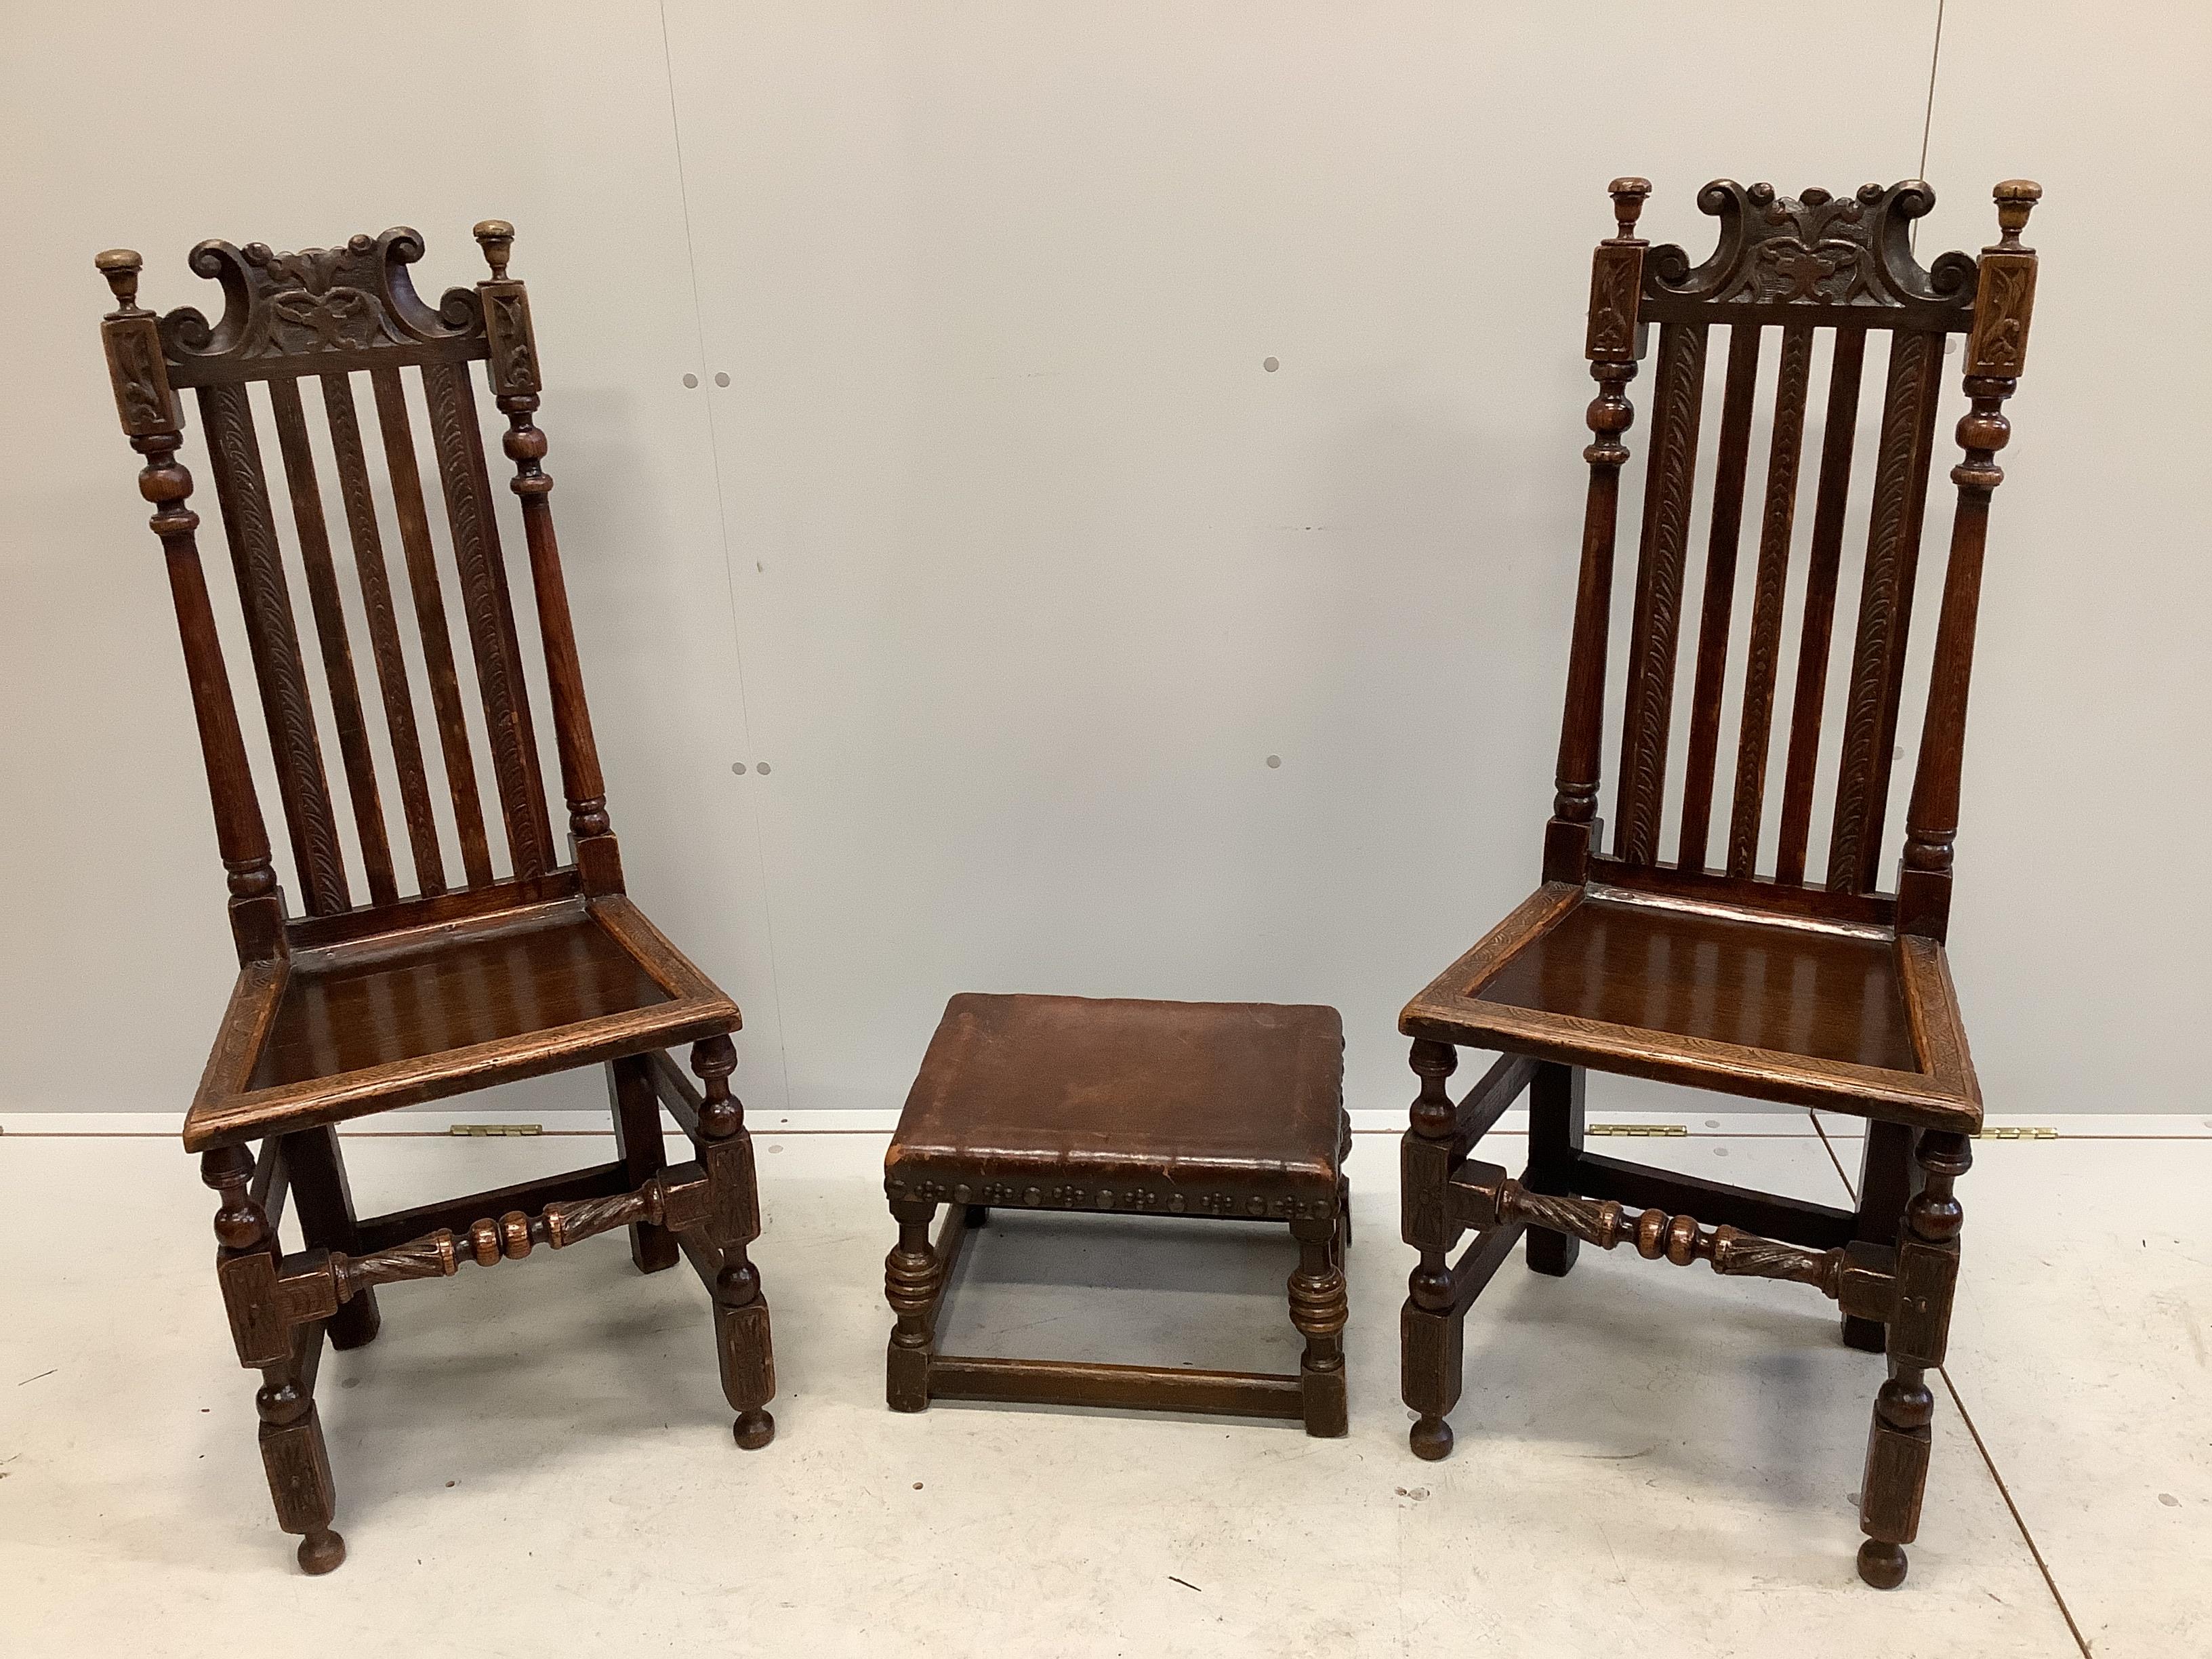 A pair of 17th century style carved oak chairs and a small stool